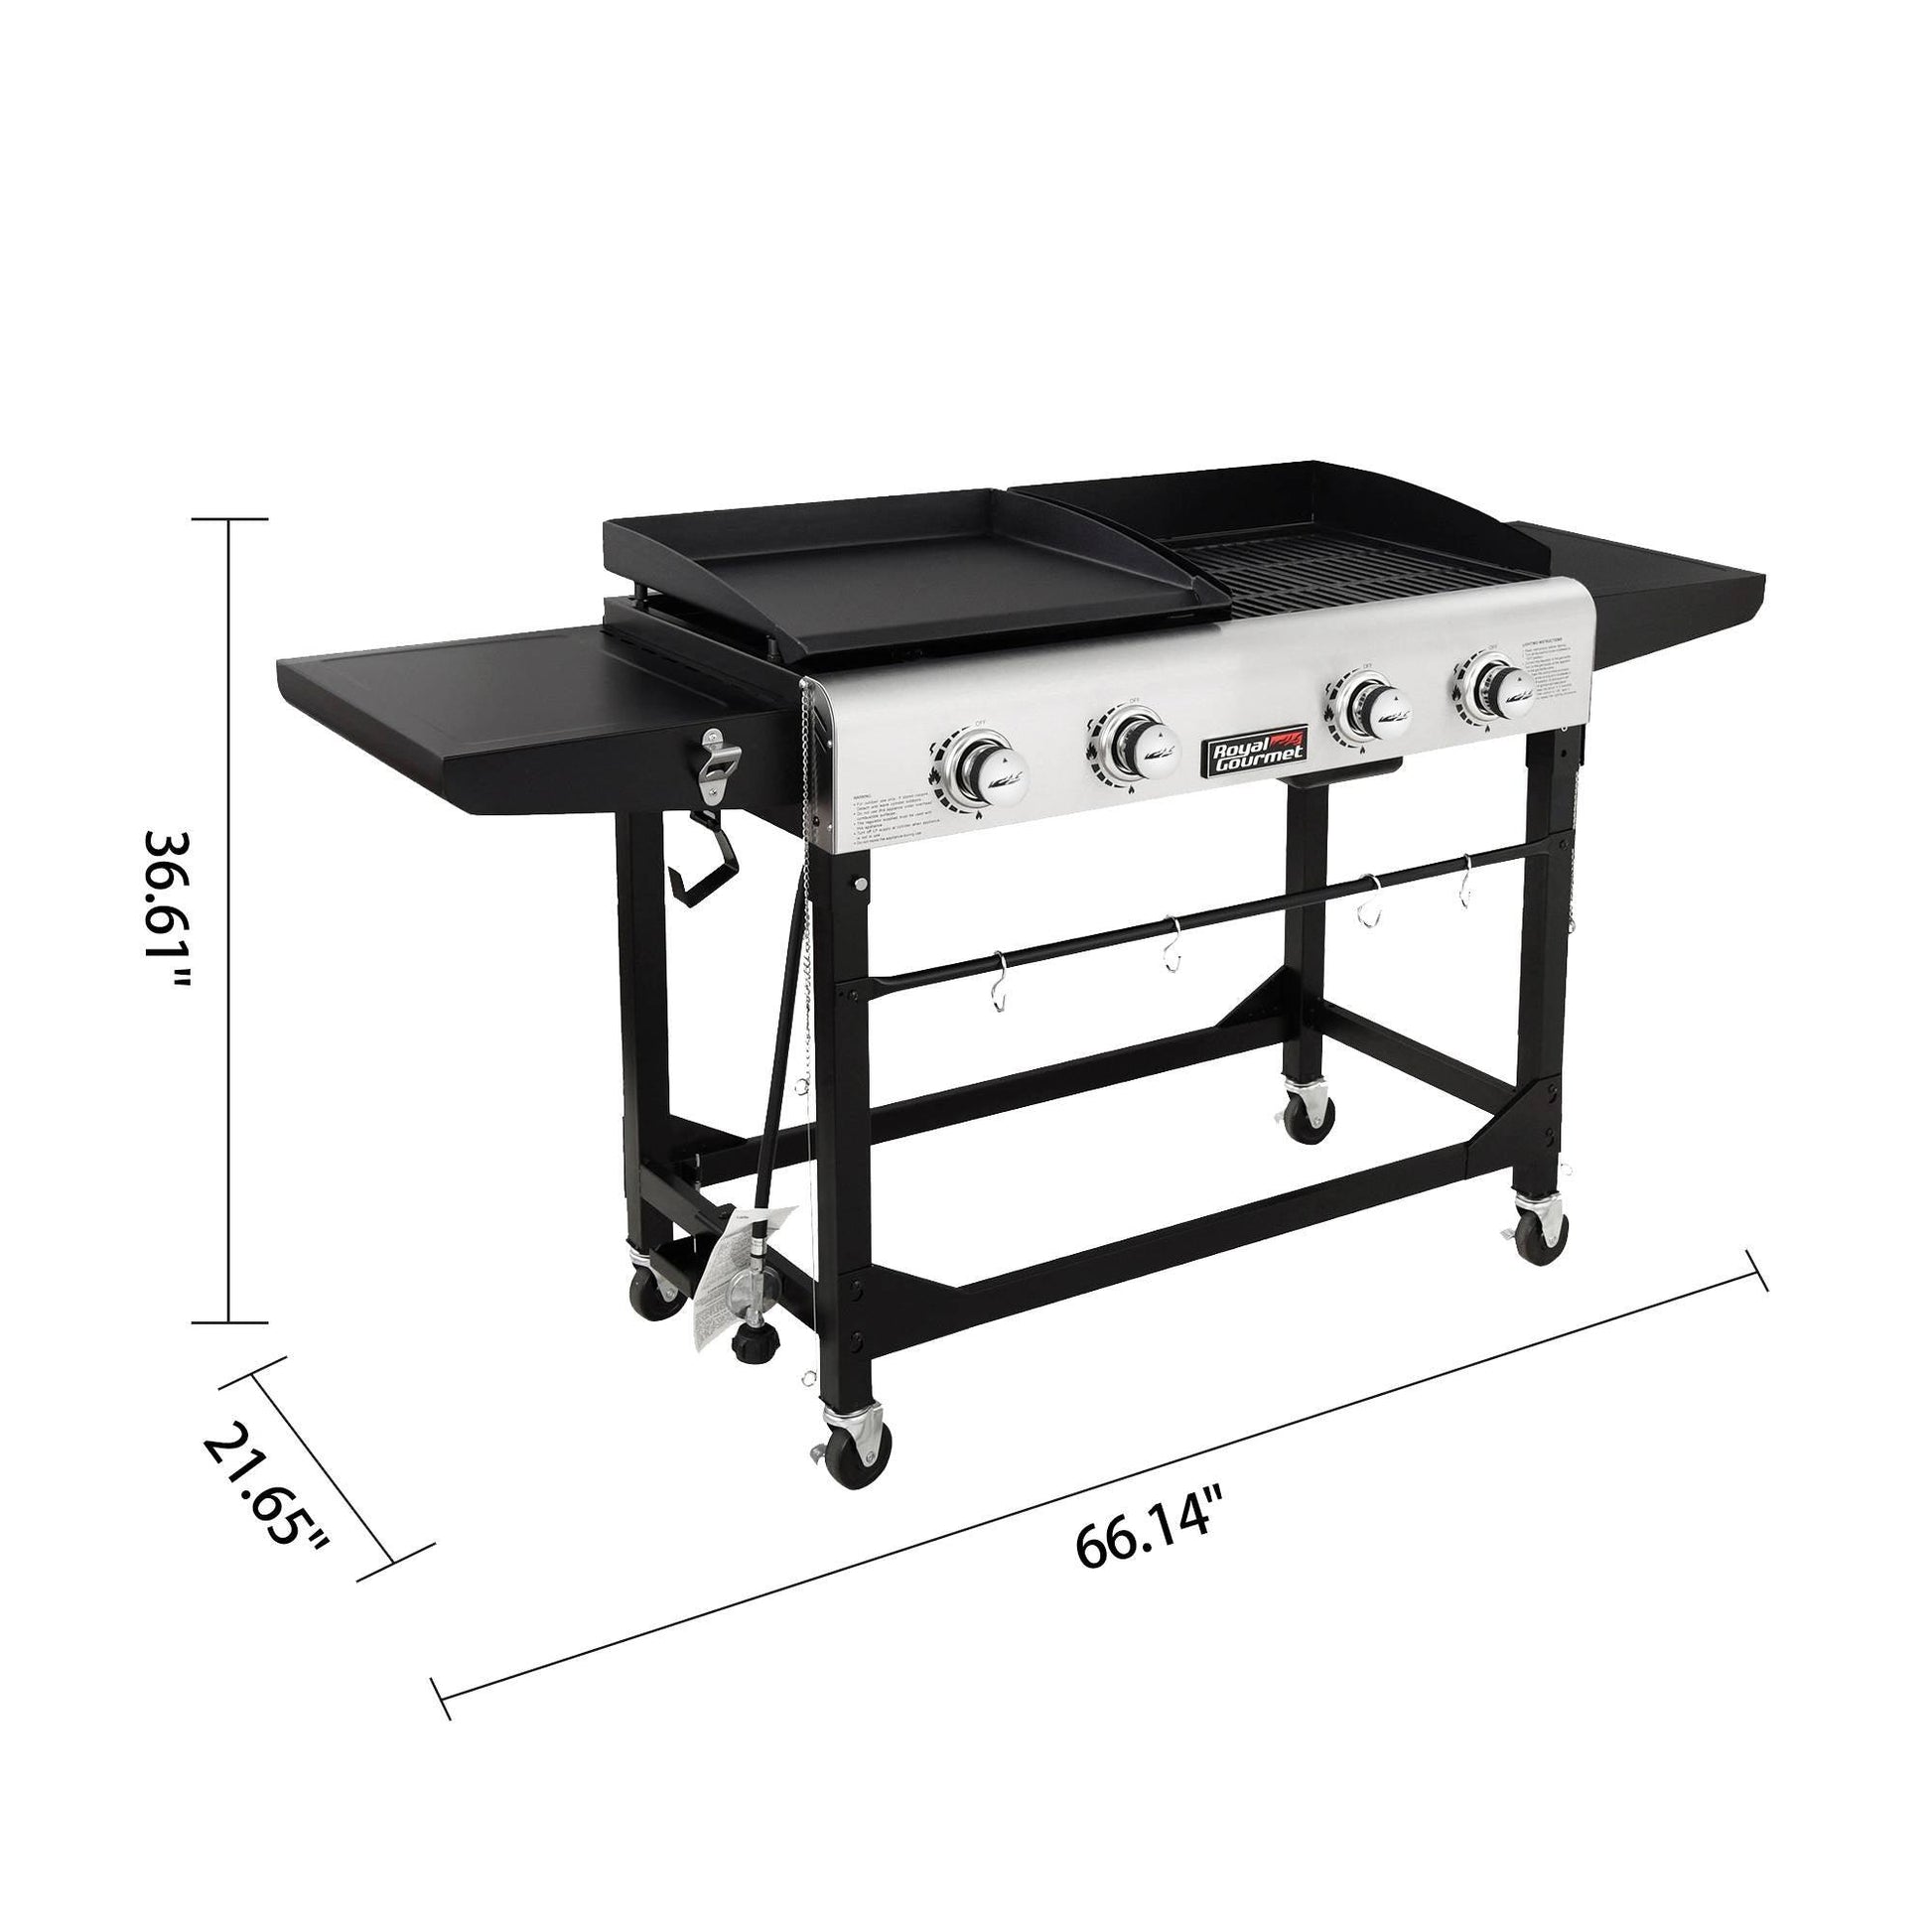 4-Burner Portable Gas Grill and Griddle Combo - Royal Gourmet